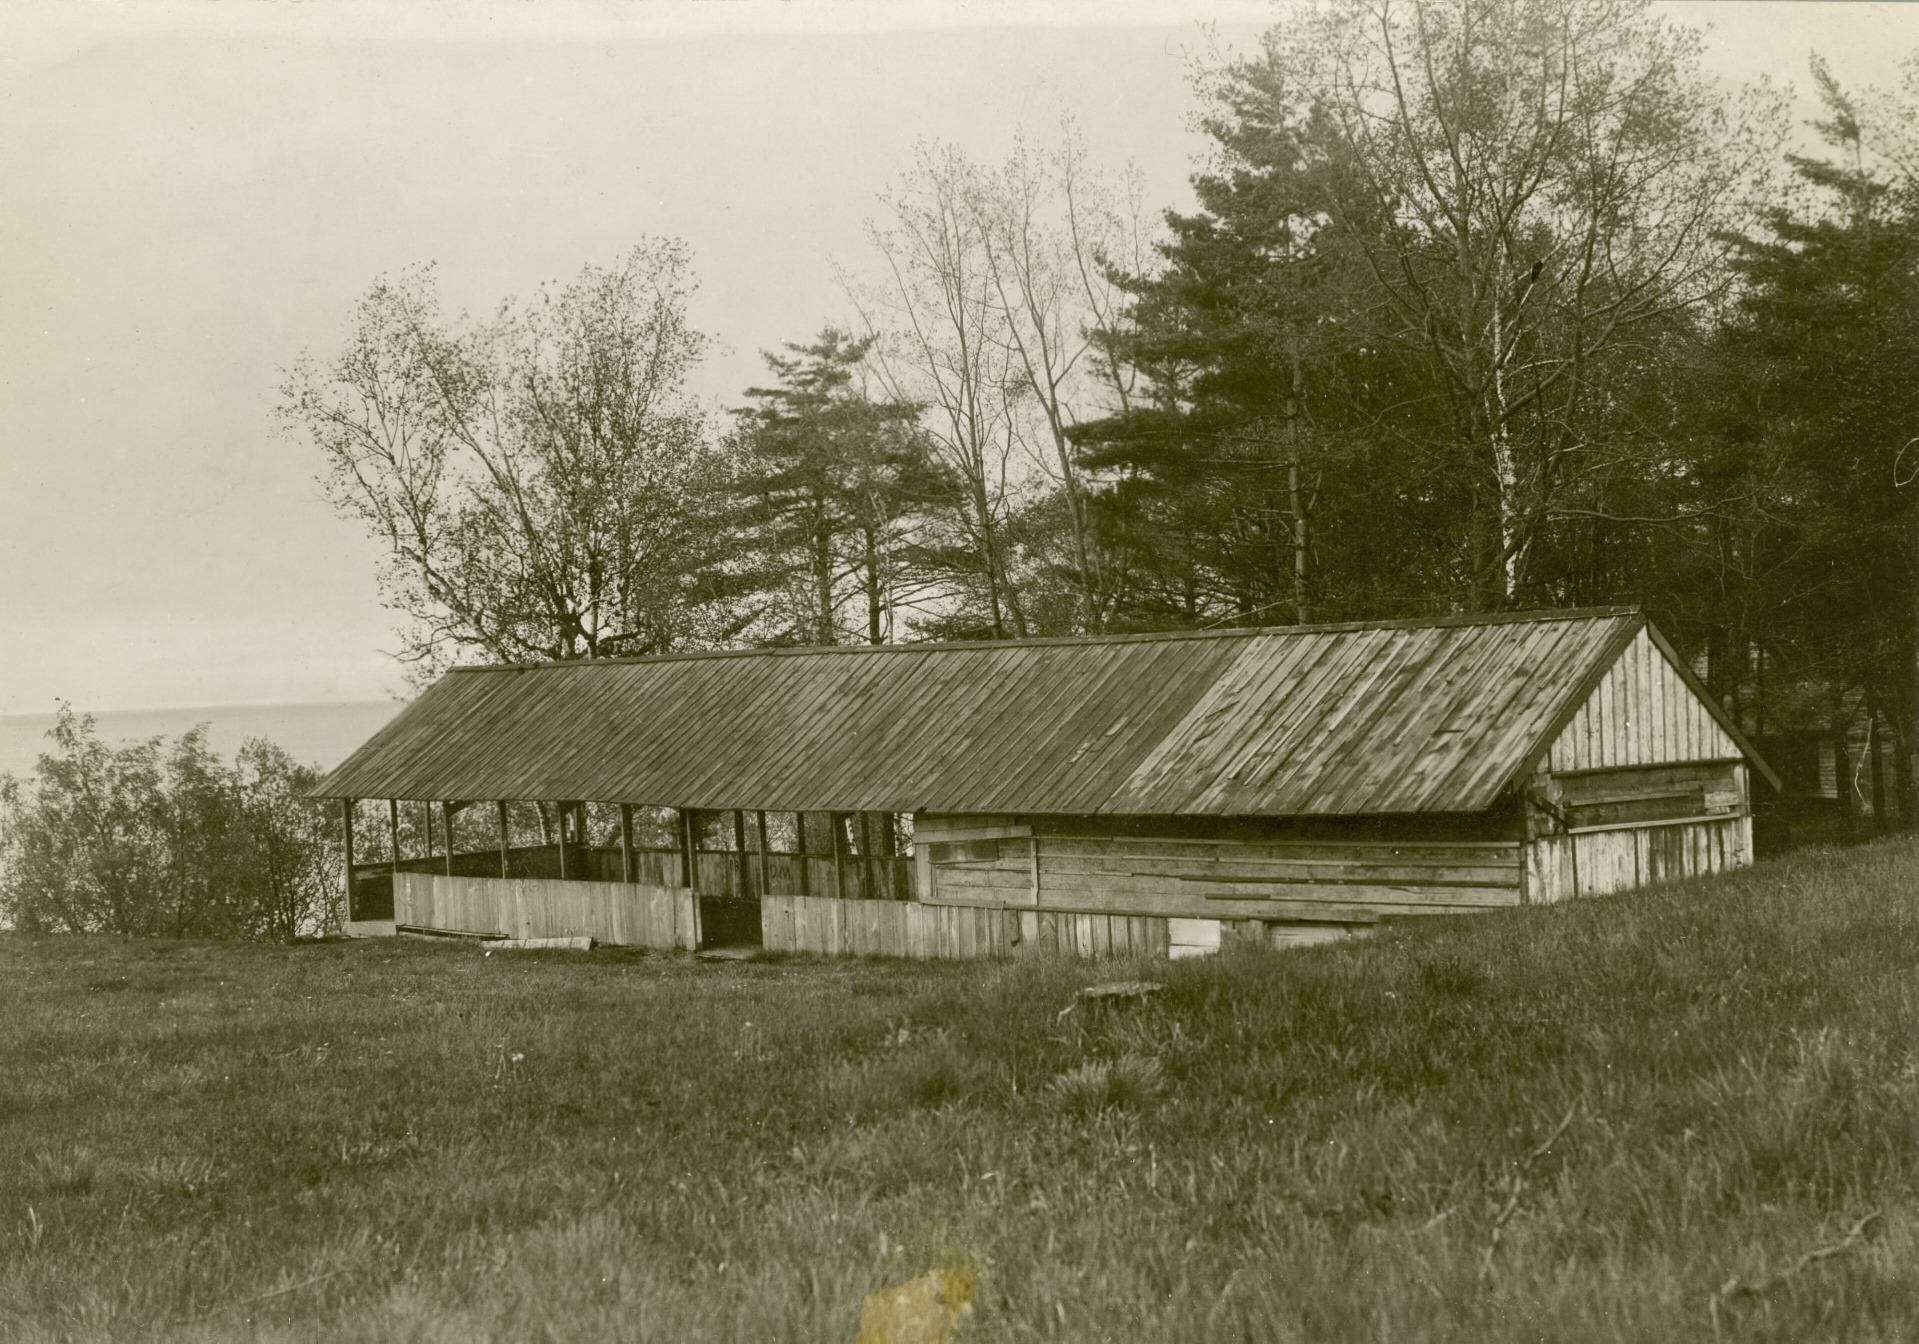 The former mess hall of the Victoria Park Forest School was looking rough around the edges by the time this photo was taken in 1910. A repurposed building that was originally created for Victoria Park amusement park.